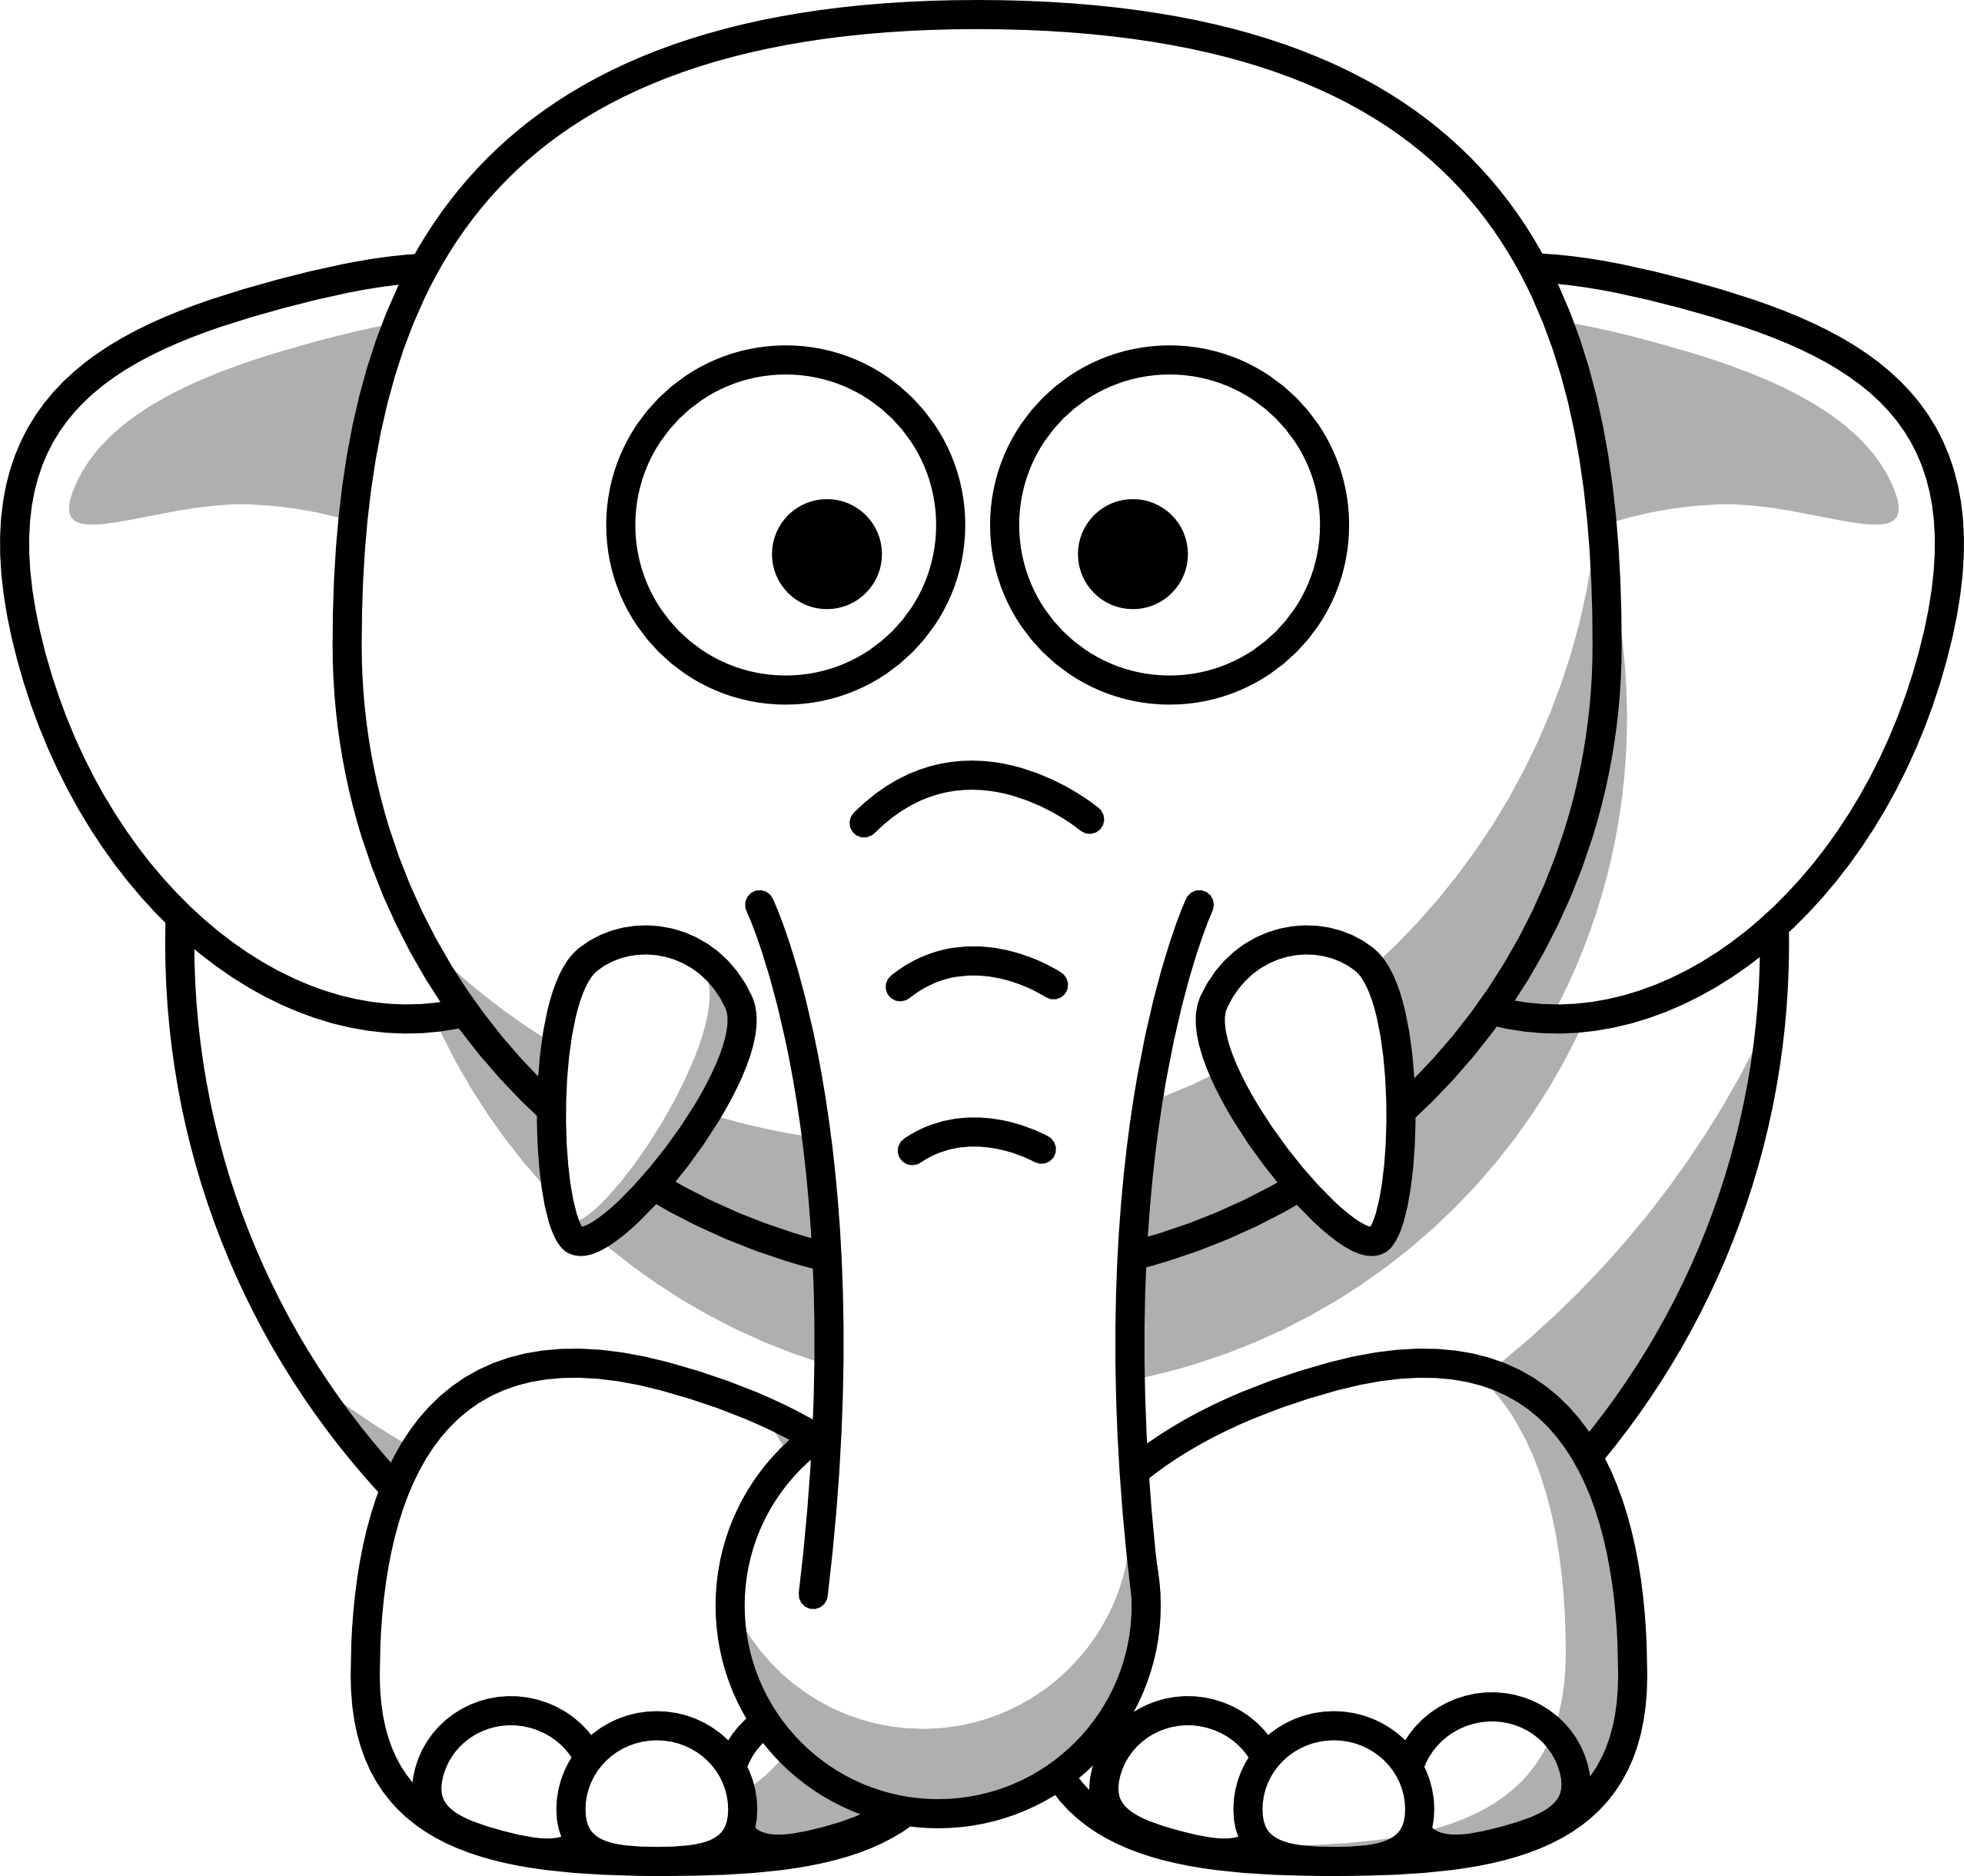 Black and white animal. Net clipart drawing